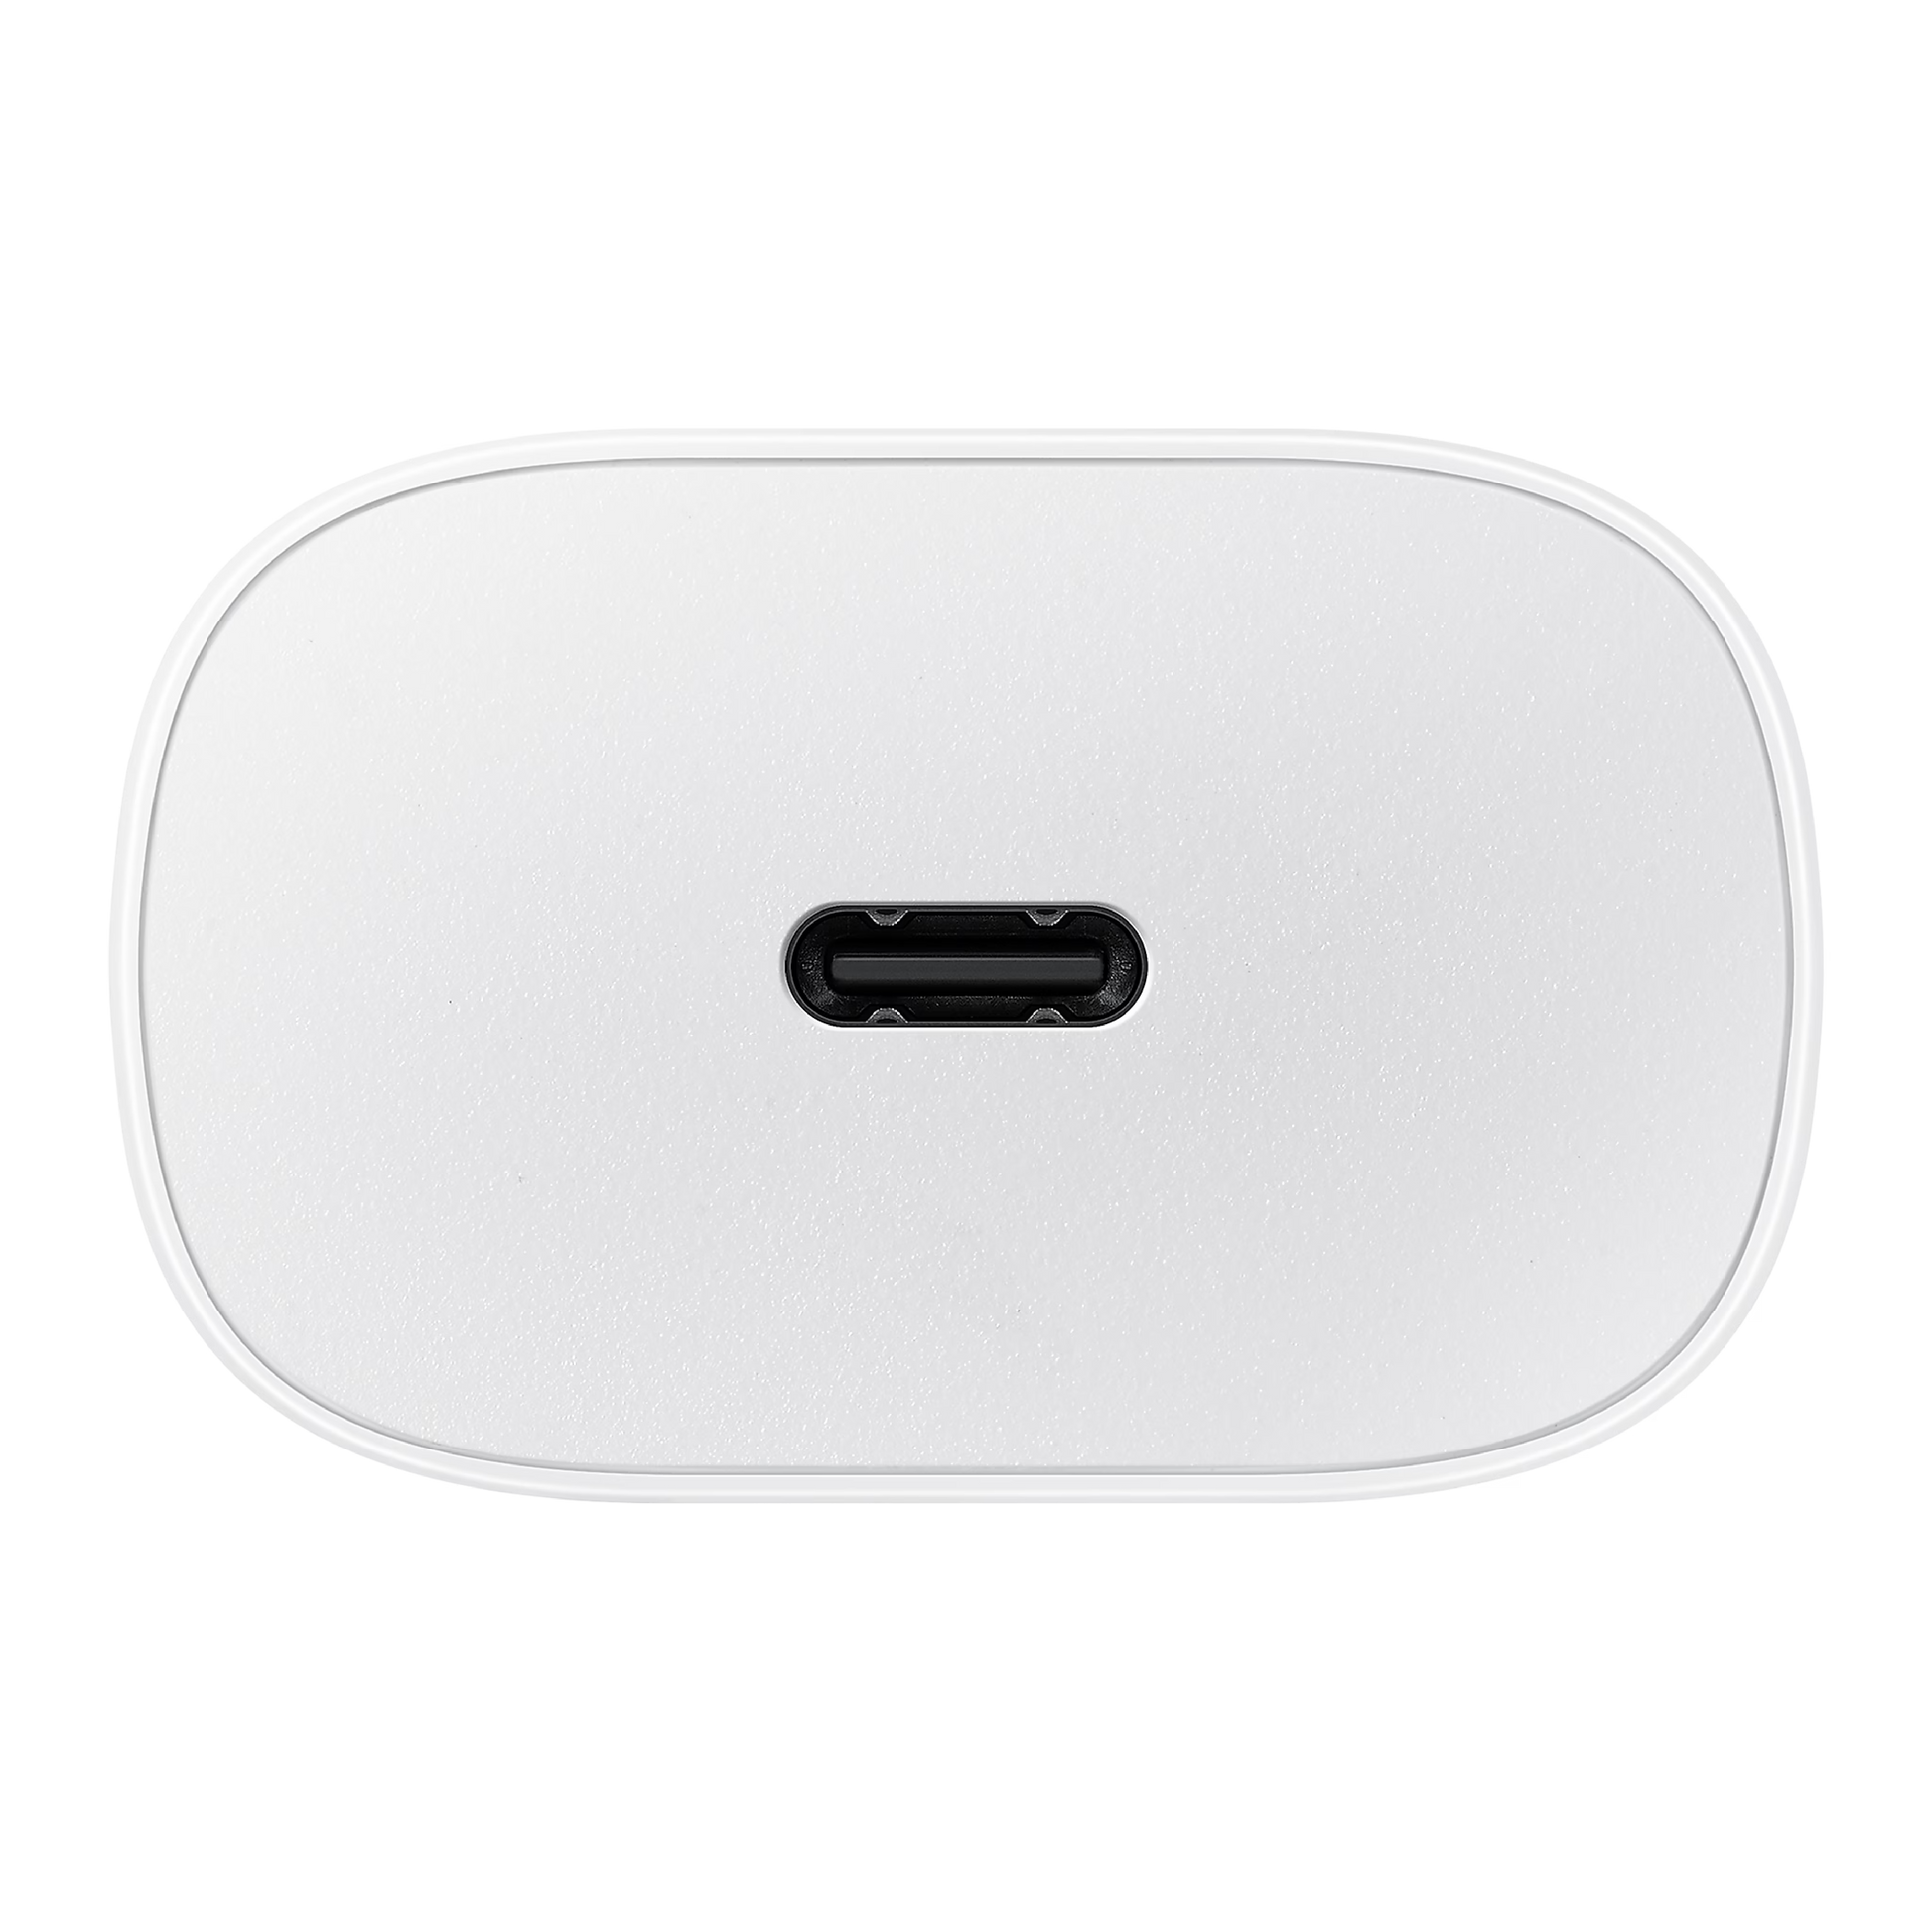 Samsung 25W USB-C wall Charger | White